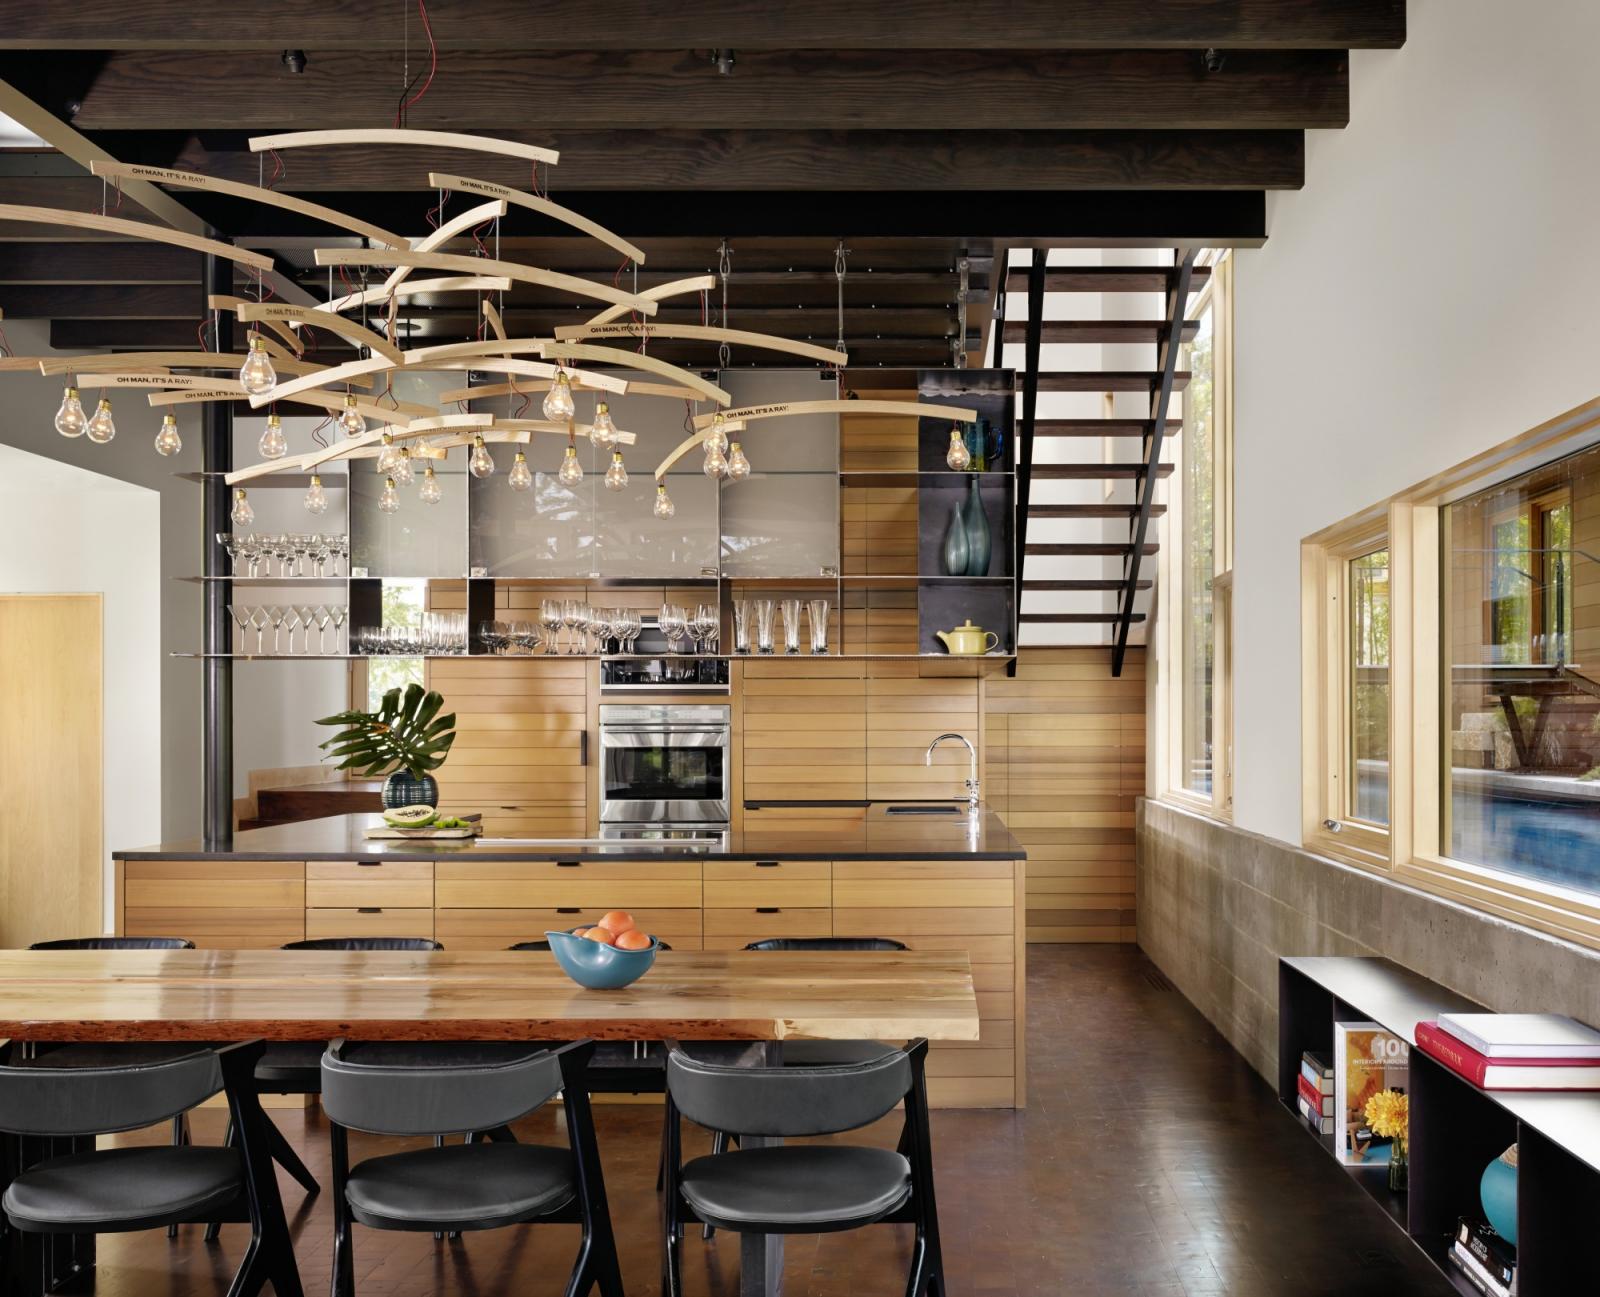 Situated at the confluence of Hog Pen Creek and Lake Austin, Hog Pen Creek Residence was envisioned by its owners as a place that evokes the playfulness of summer on the lake. Interior image looking across custom wood dining table and chandelier with view